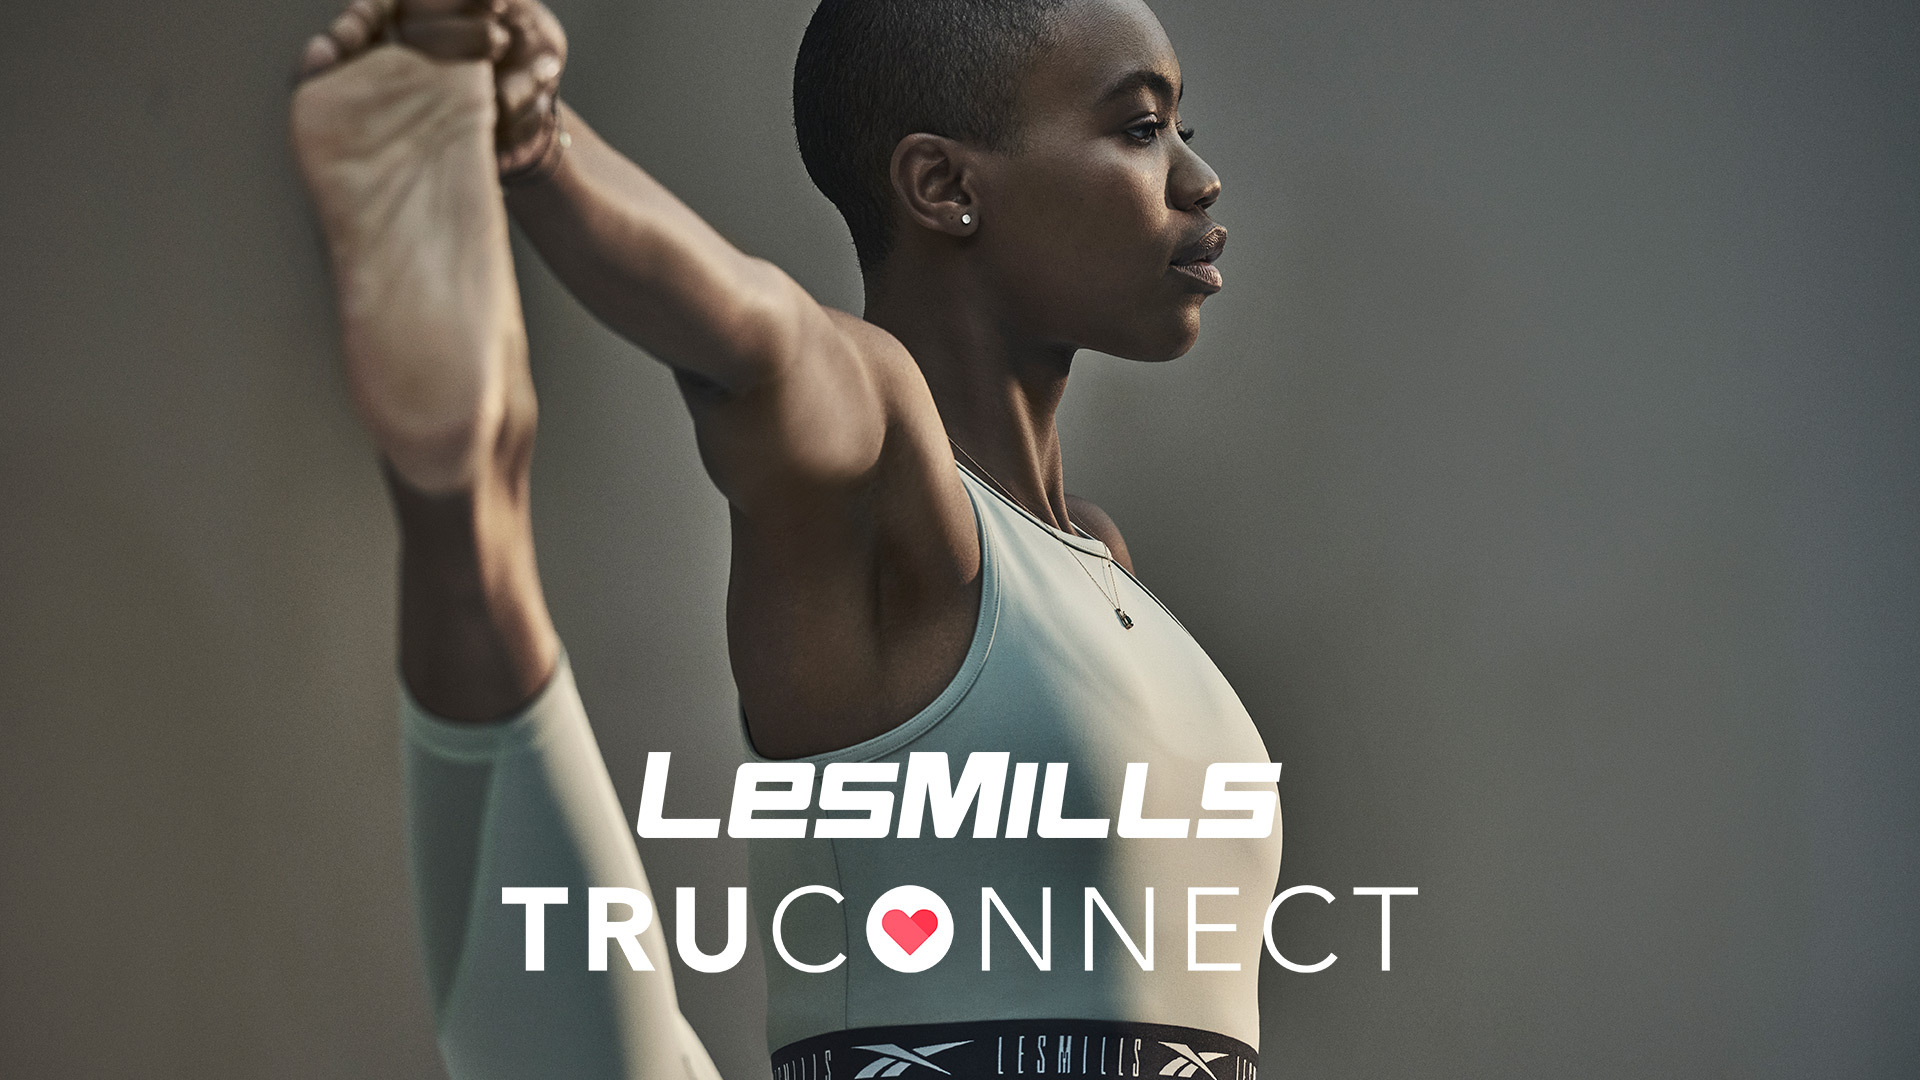 Les Mills and TRUCONNECT